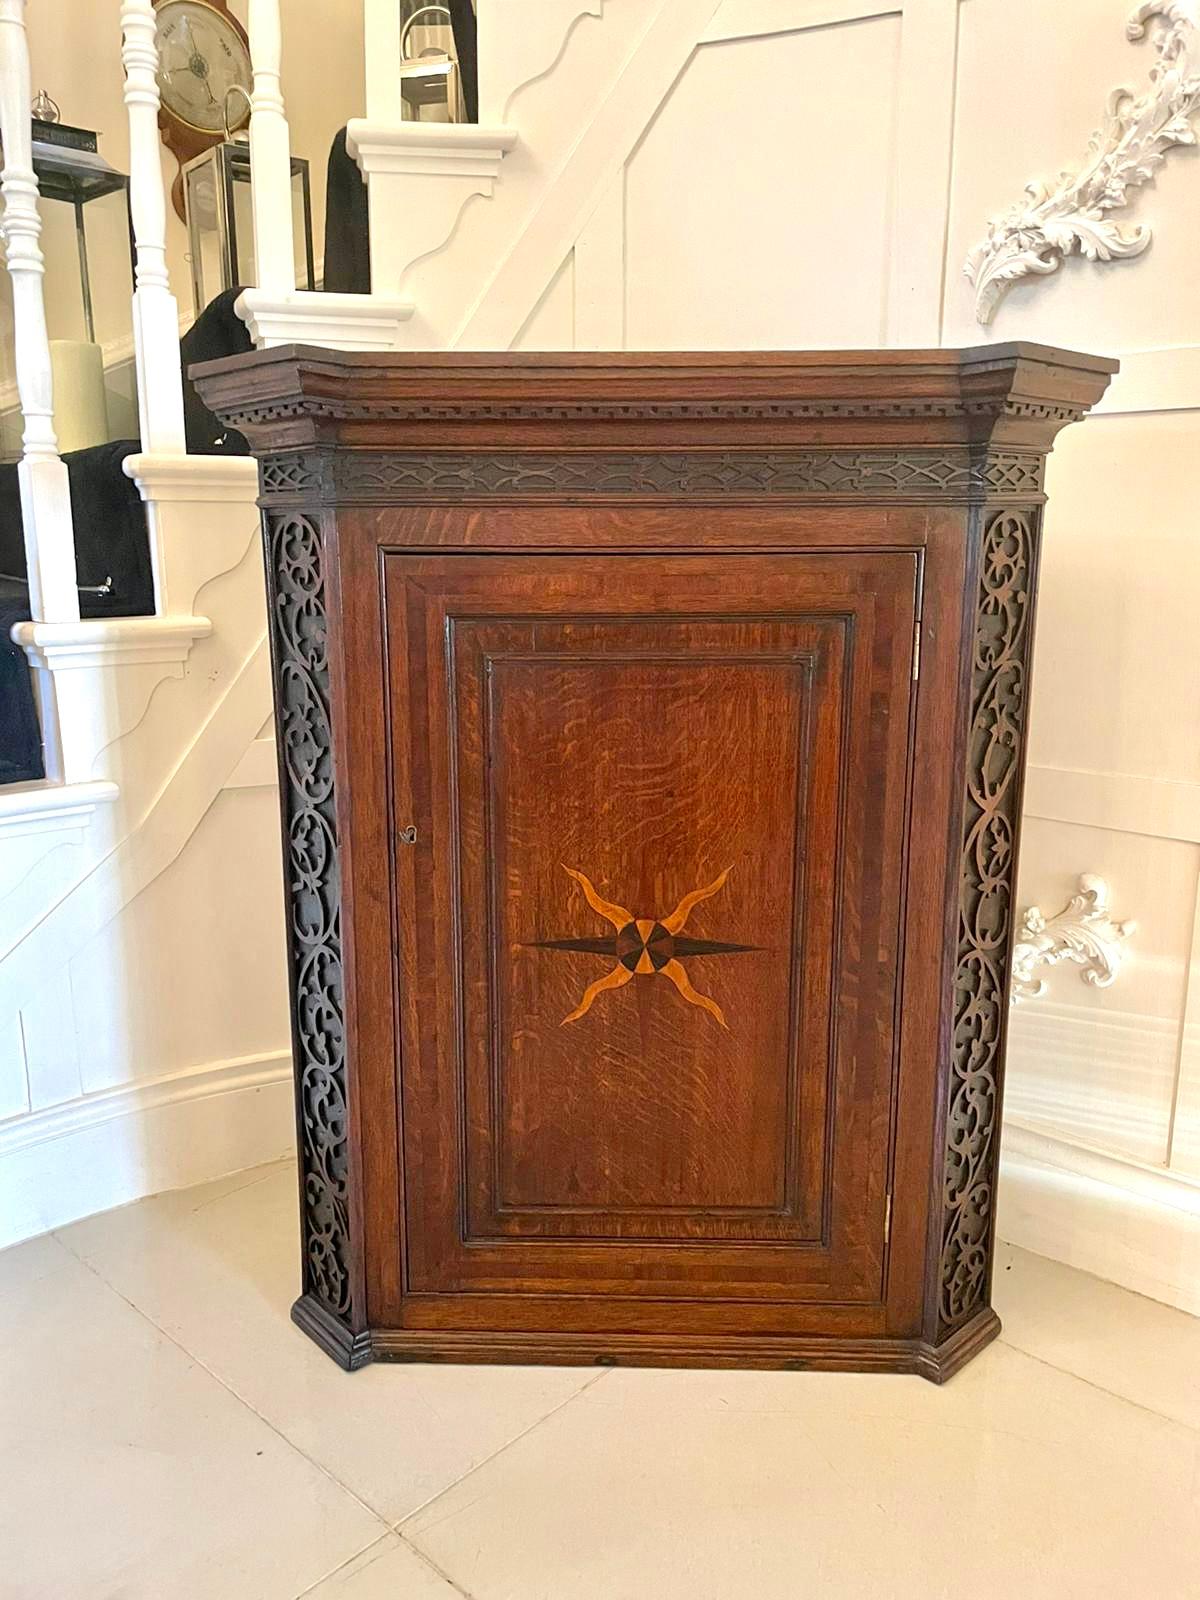 Outstanding Antique George III Quality Oak Inlaid Hanging Corner Cabinet Out For Sale 2